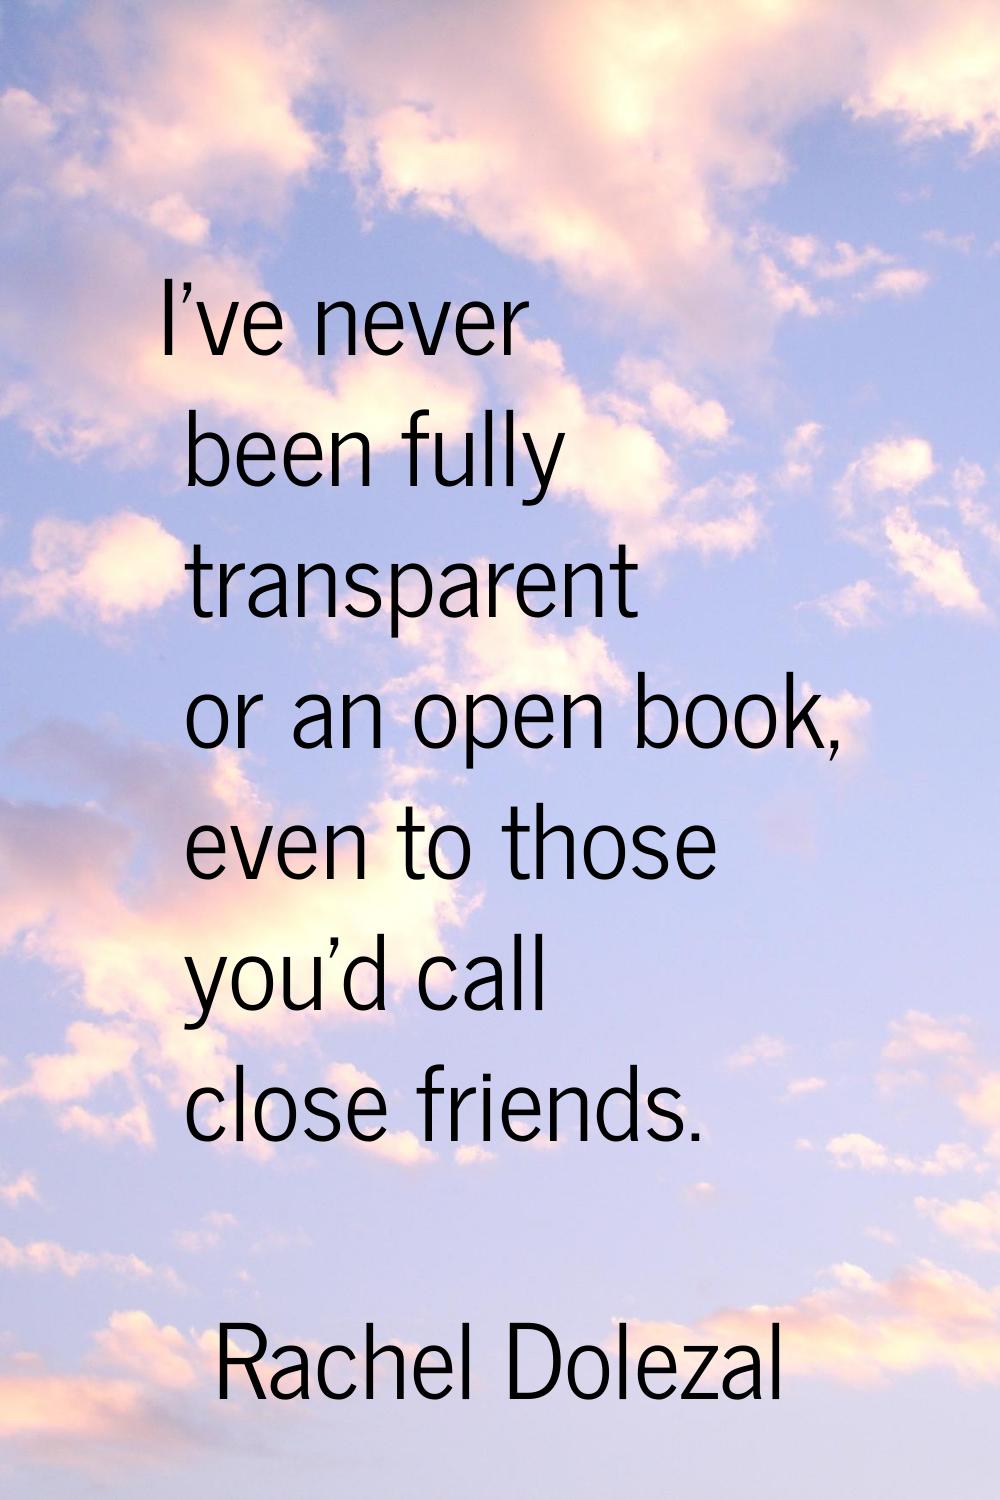 I've never been fully transparent or an open book, even to those you'd call close friends.